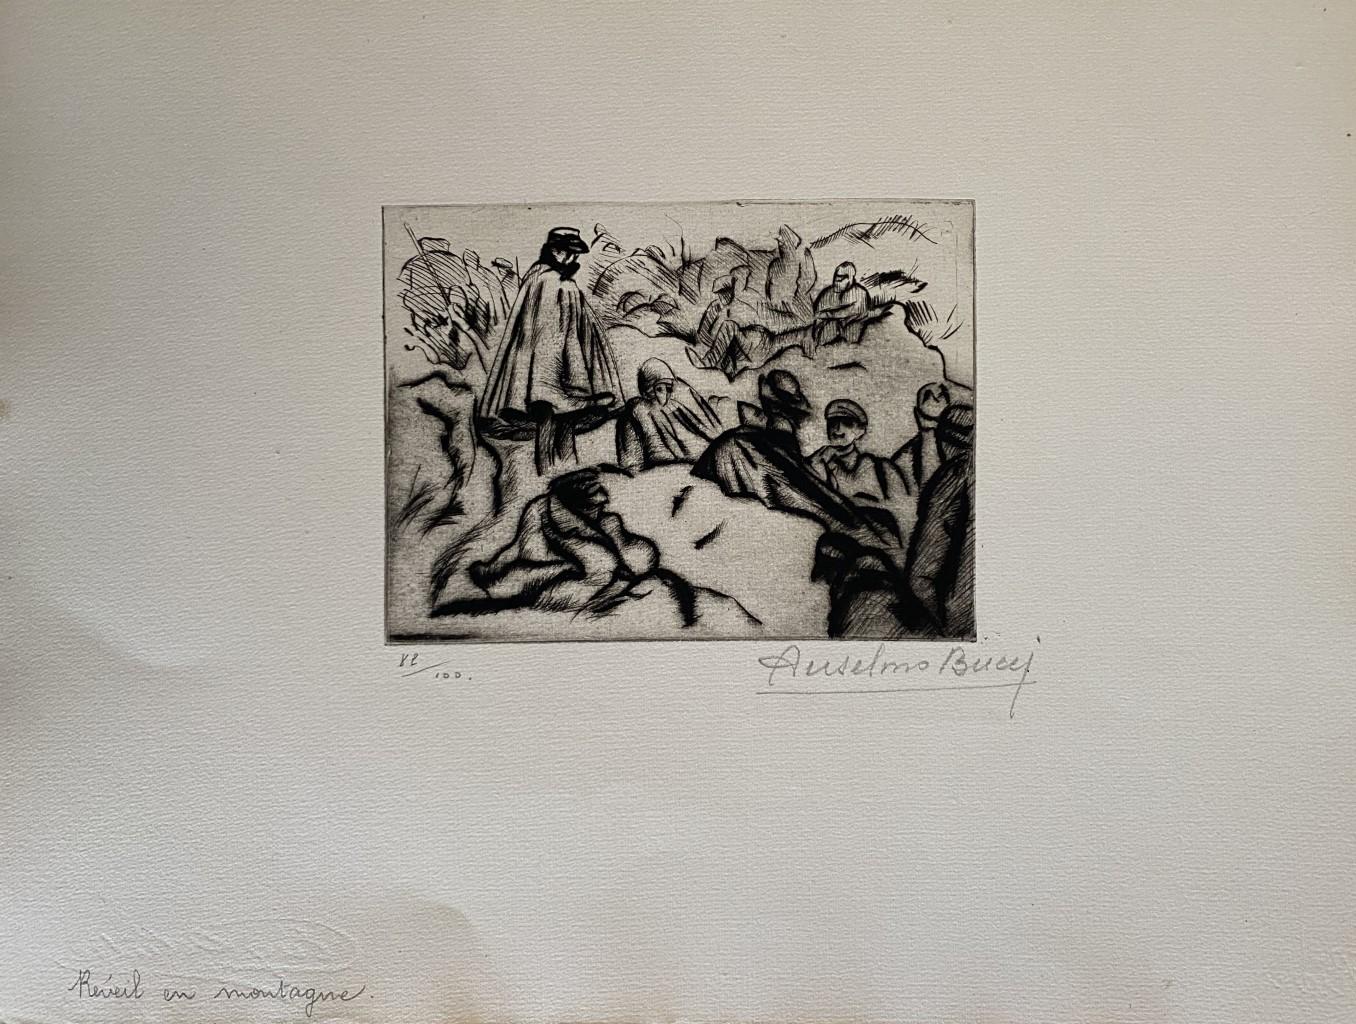 "Military" 1914 is a beautiful print in etching technique, realized by Anselmo Bucci (1887-1955).

Hand signed. Numbered 89/100 of prints on the lower left. On the lower left corner, an iscription written in pencil, Reveil en montagne.

Image